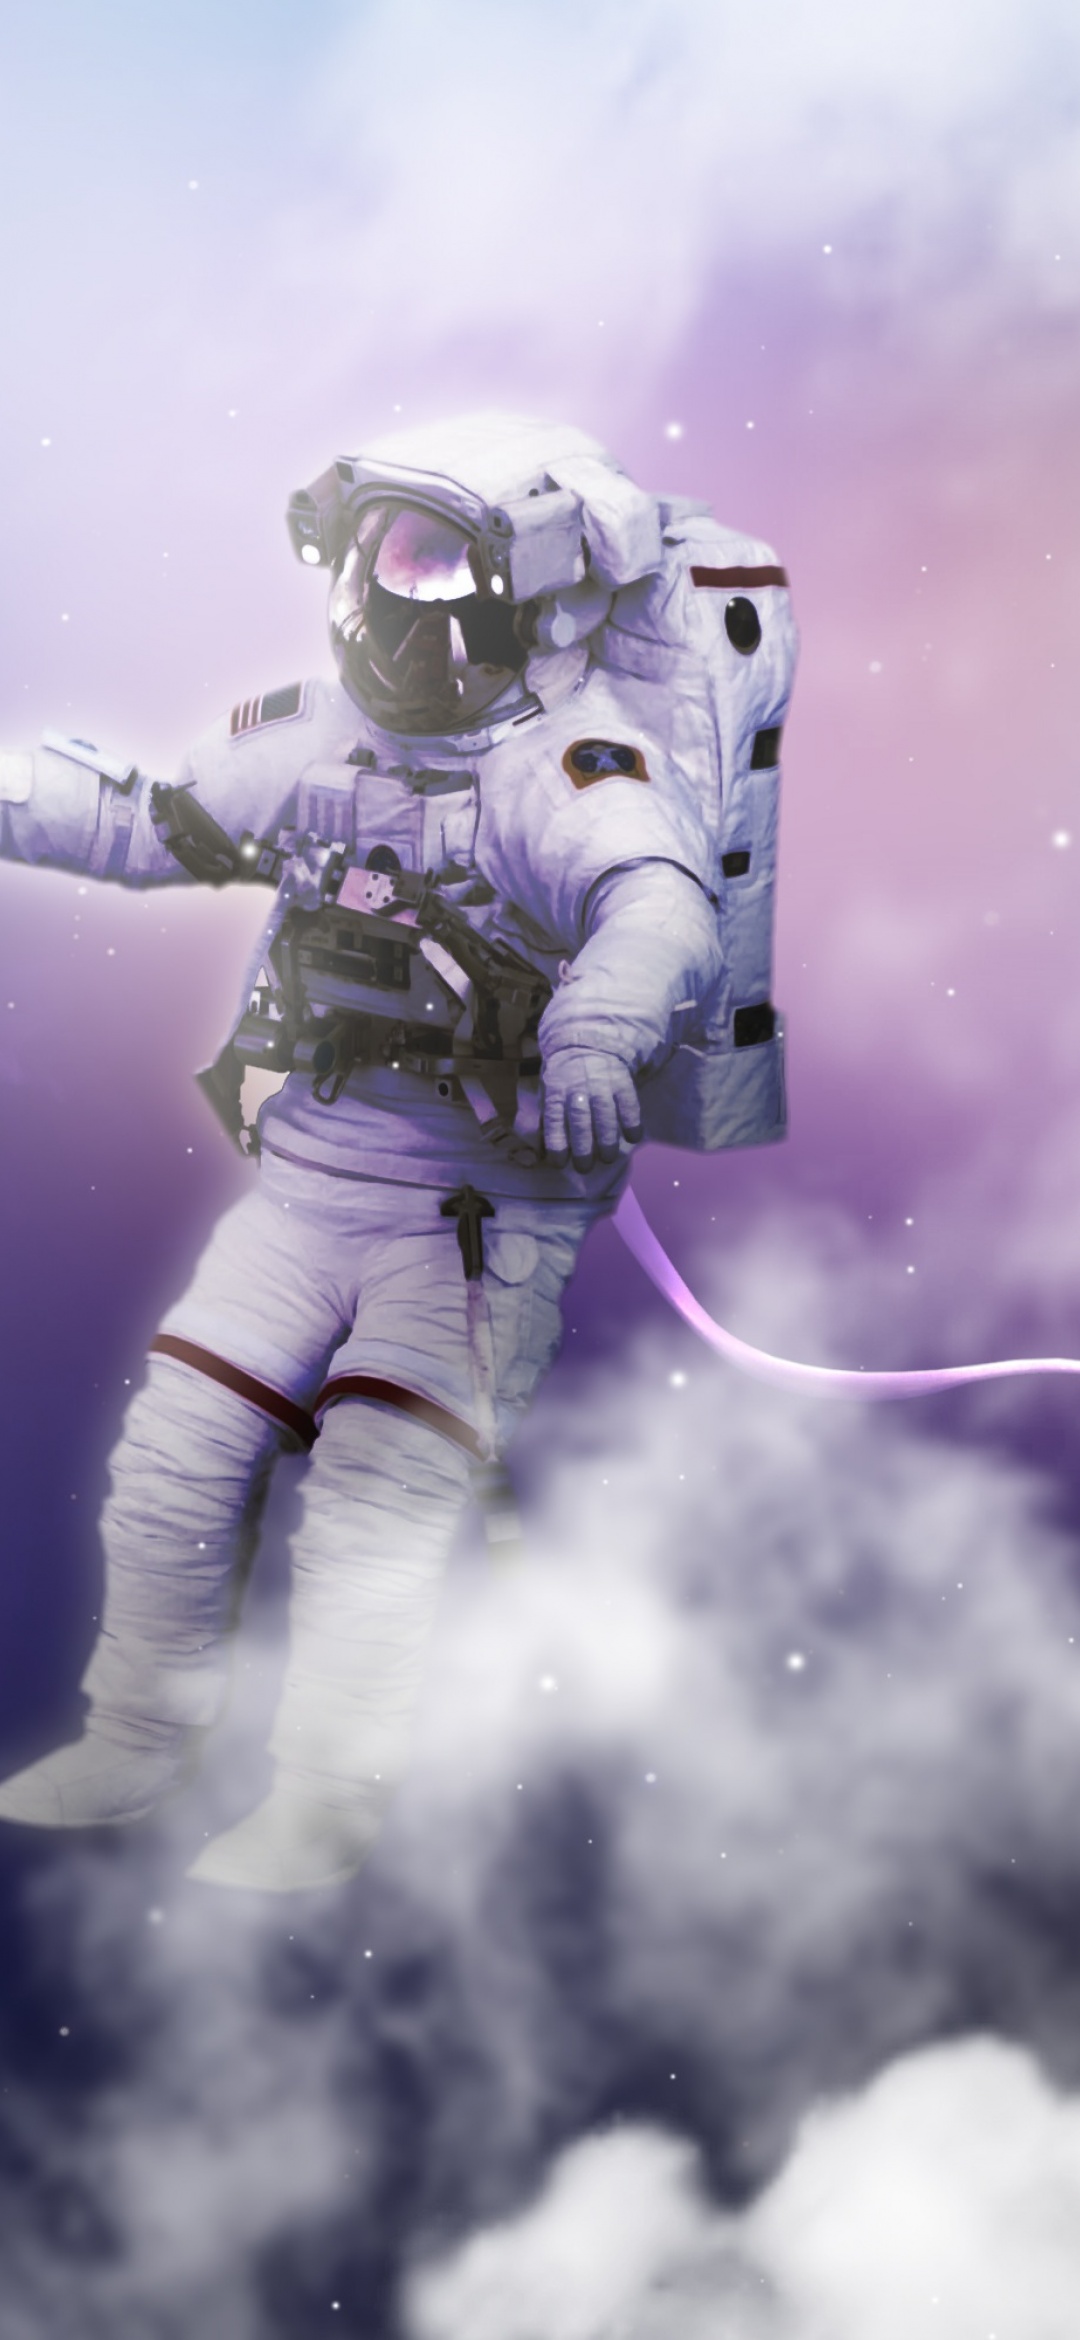 Space Astronaut On Rocket Ship IPhone Wallpaper  IPhone Wallpapers  iPhone  Wallpapers